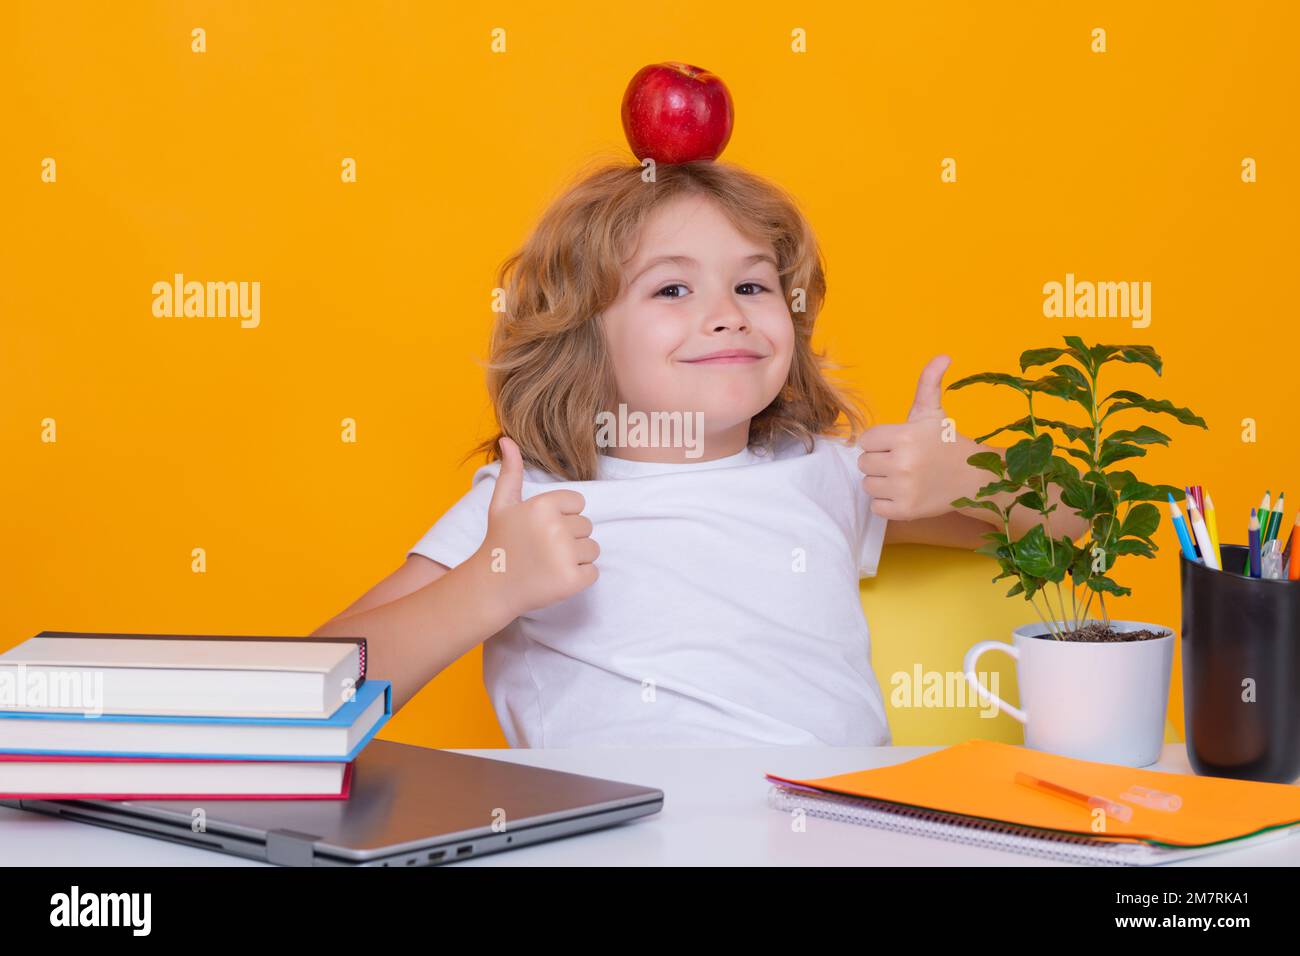 Funny pupil. Nerd school kid isolated on studio background. Clever child from elementary school with book. Smart genius intelligence kid ready to Stock Photo